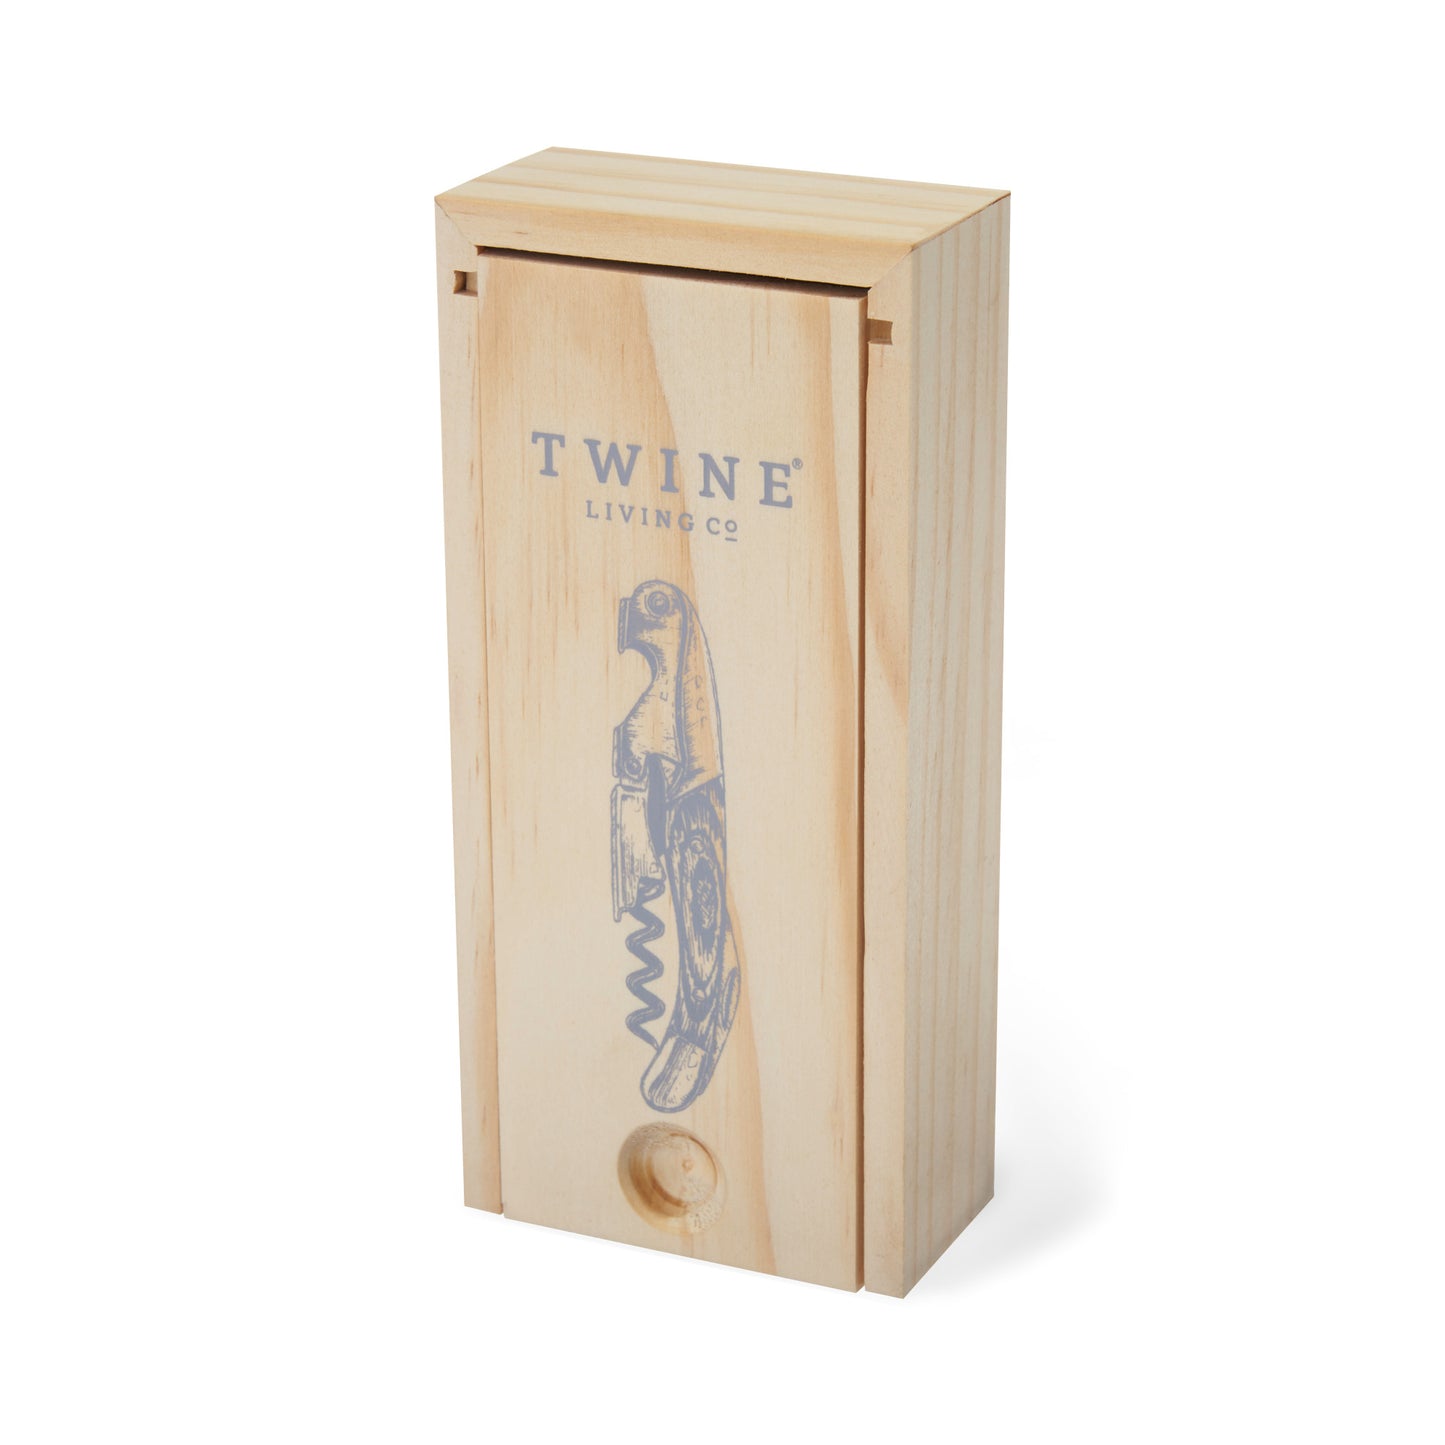 Wooden Double Hinged Corkscrew